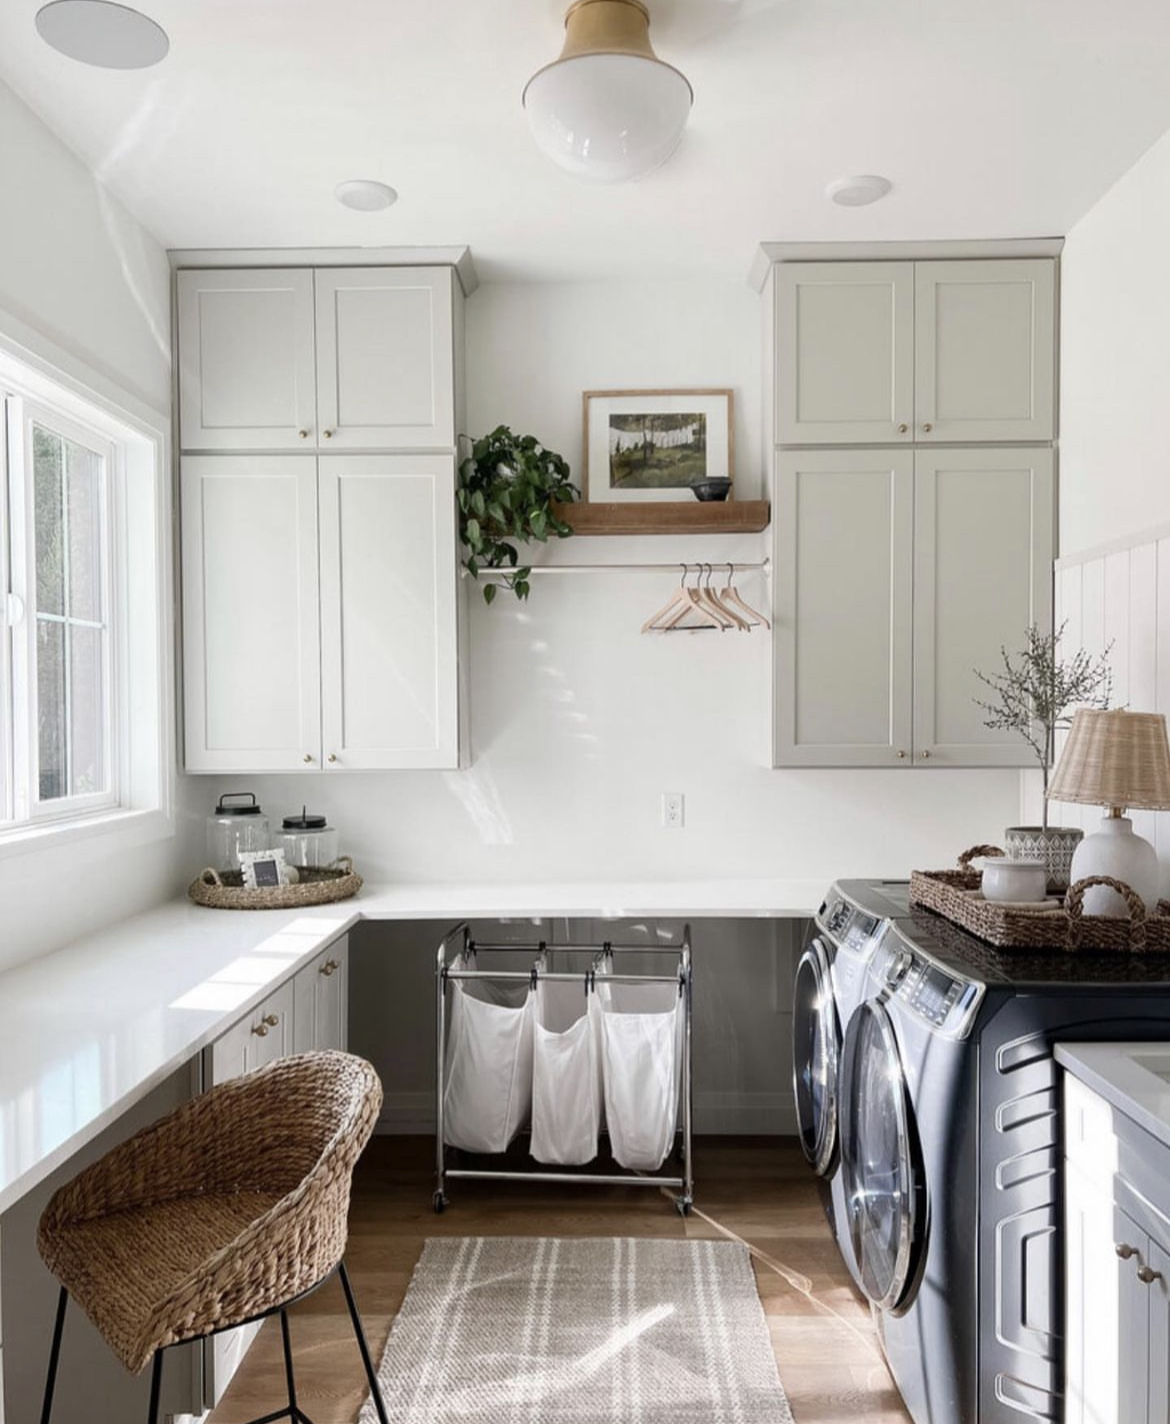 Laundry Room Inspiration - A Thoughtful Place